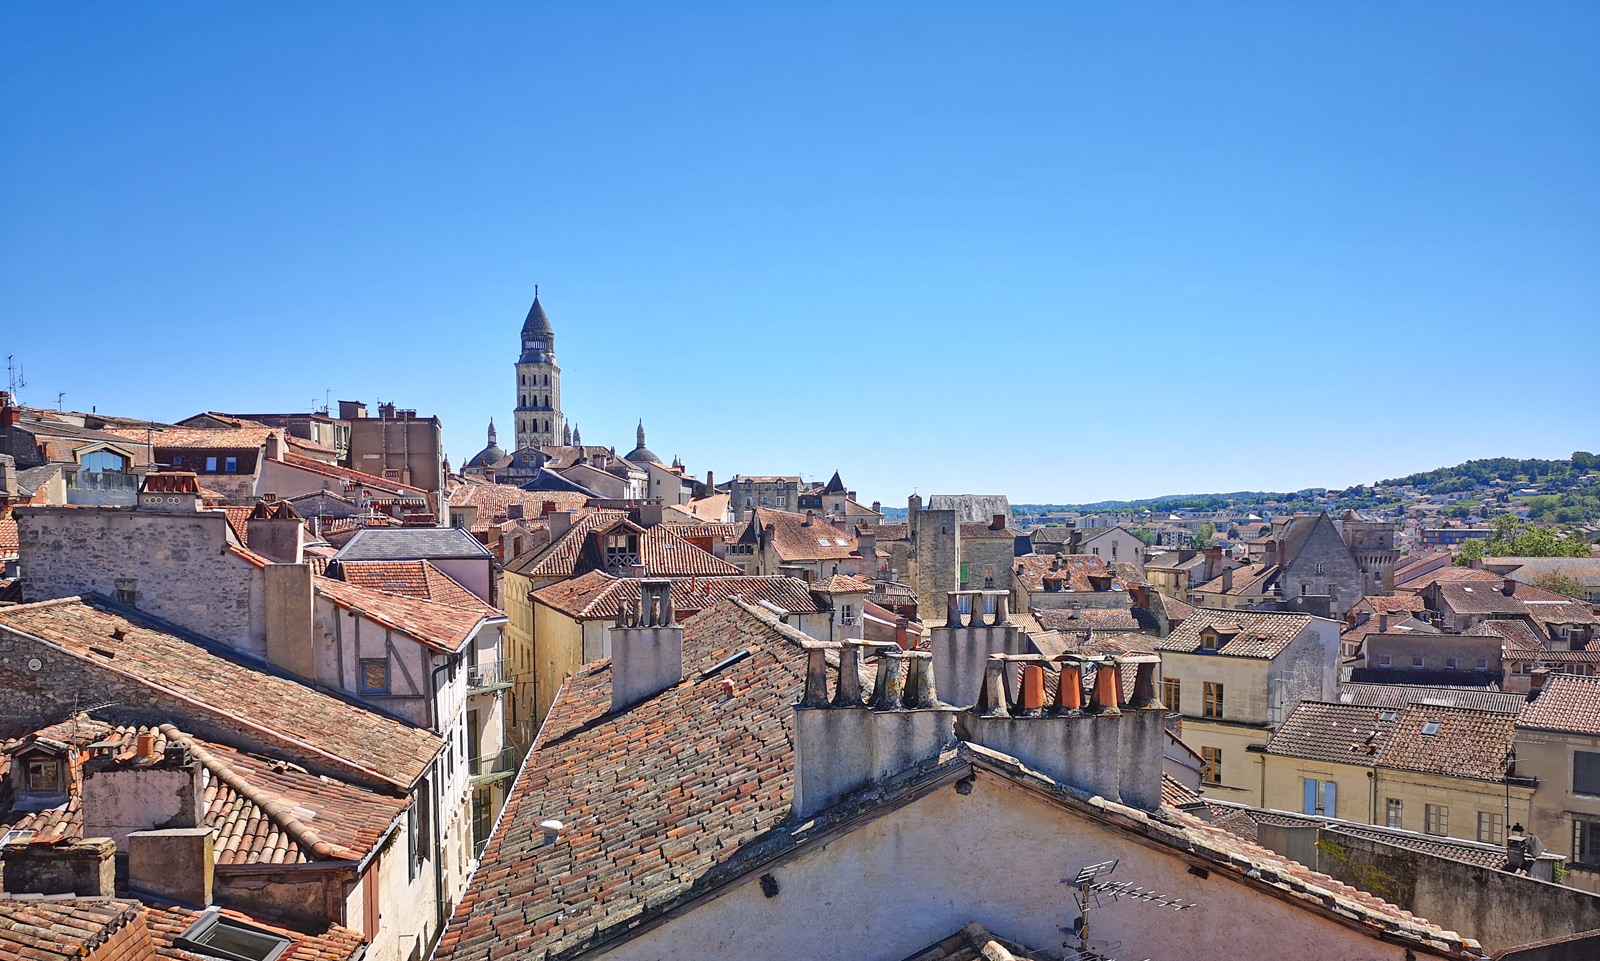 Périgueux: a walk to discover the city's heritage